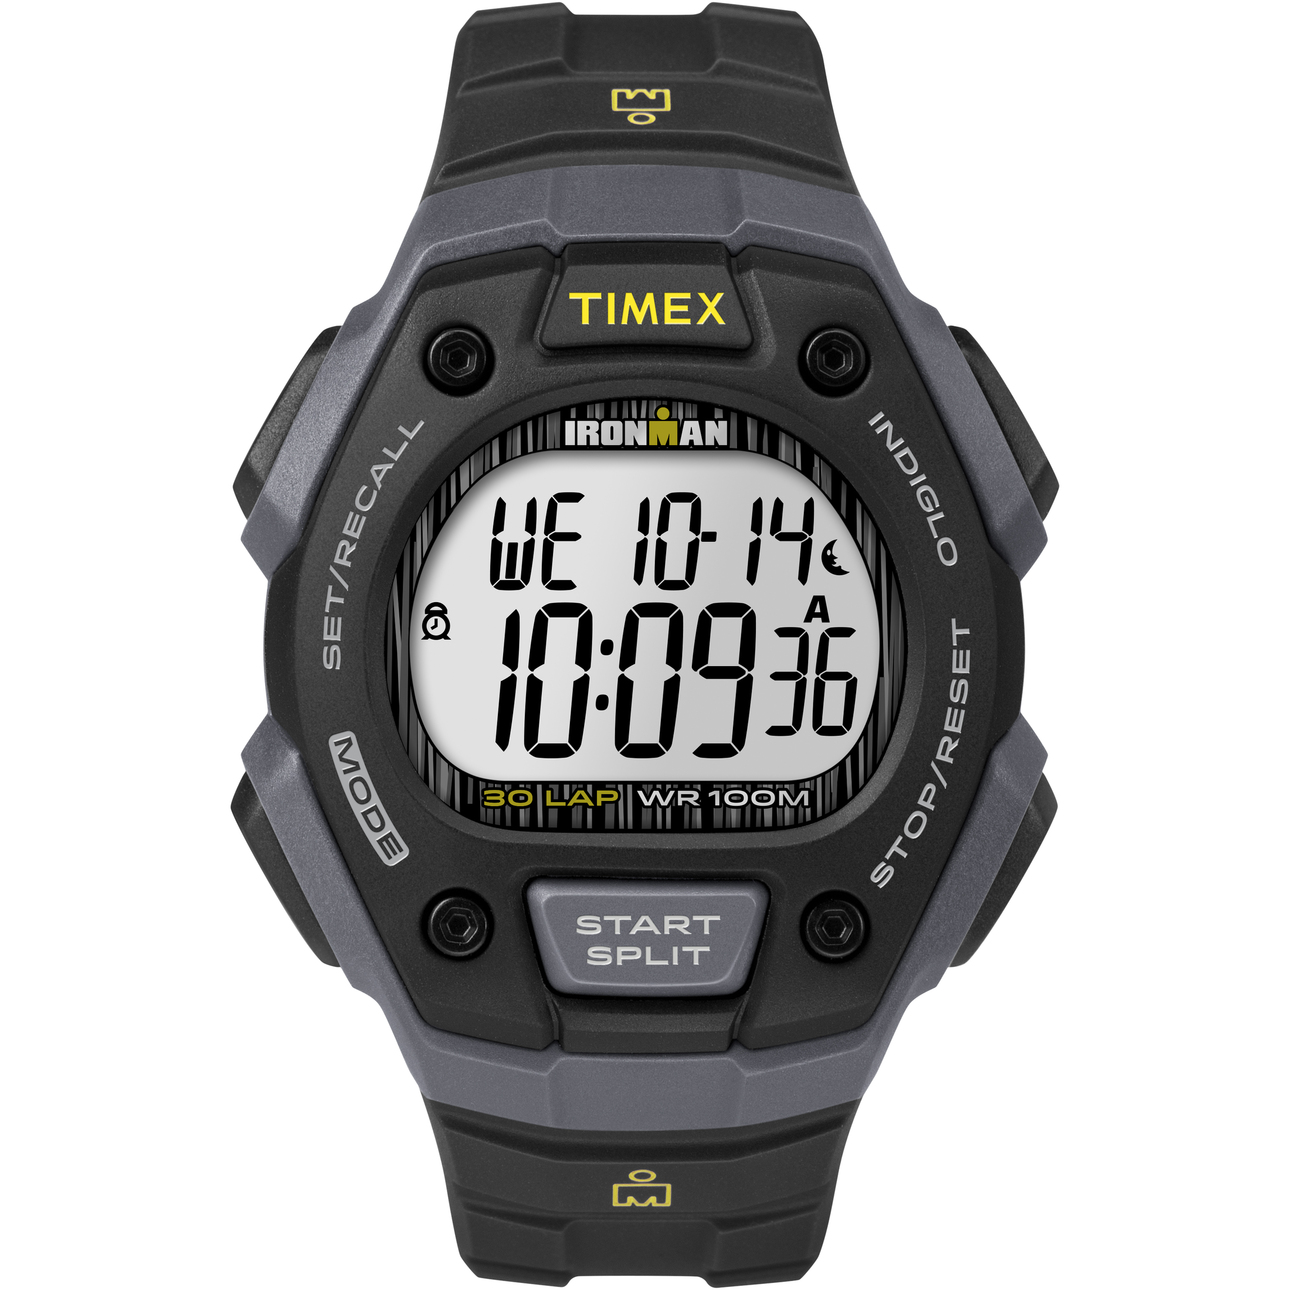 TIMEX Men's IRONMAN Classic 30 Black/Gray 38mm Sport Watch, Resin Strap - image 1 of 4